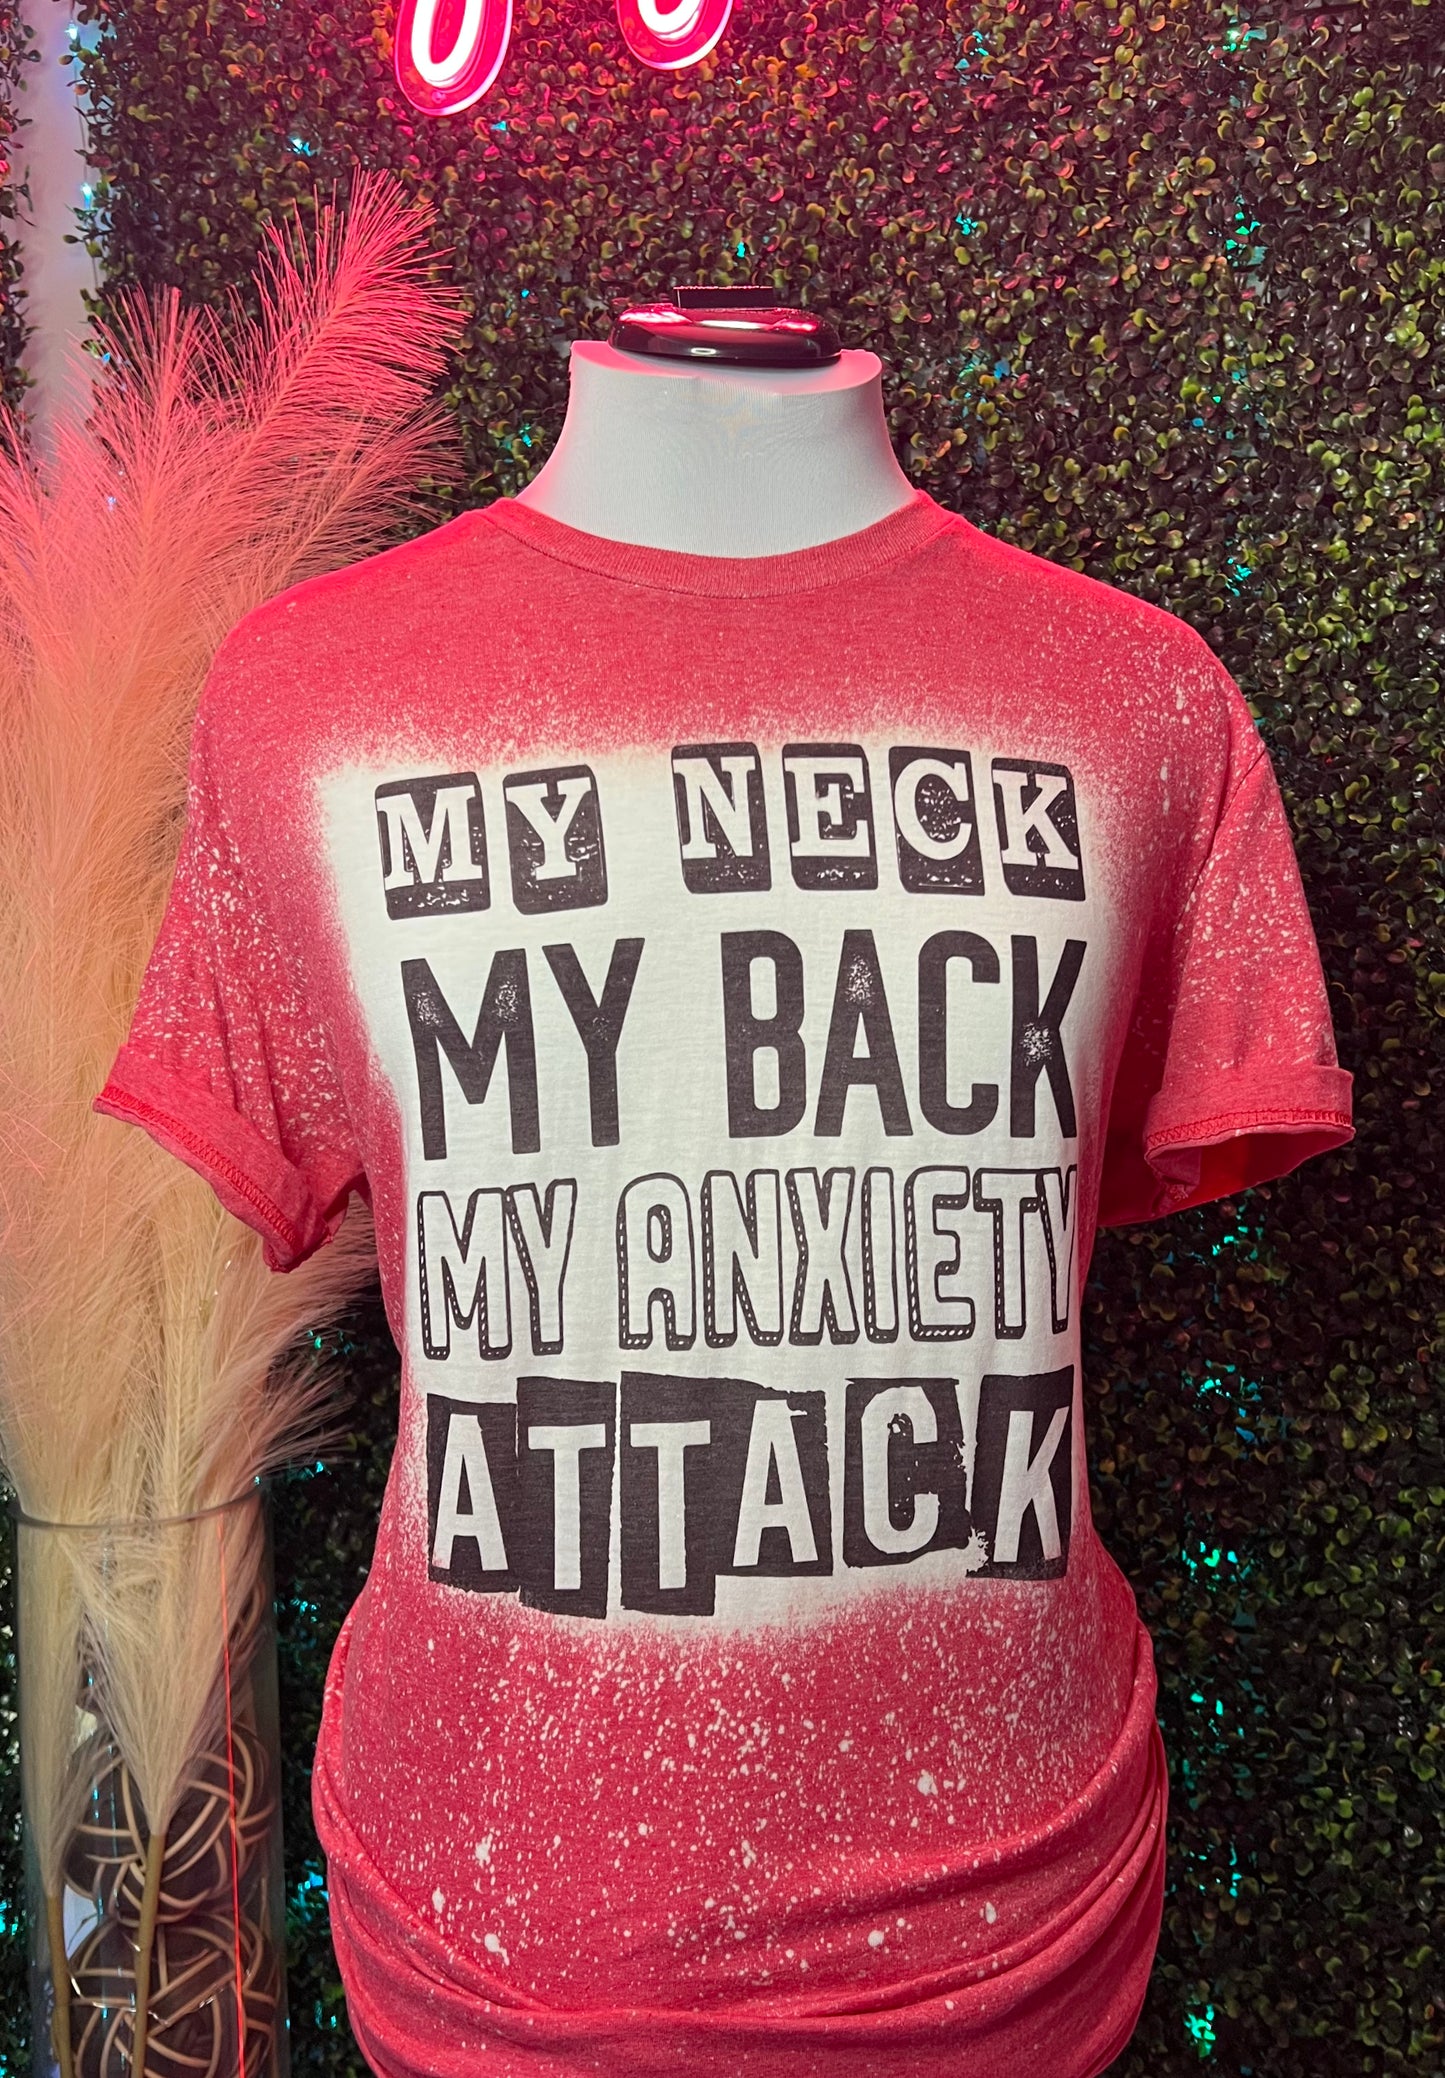 My Neck My Back My Anxiety Attack